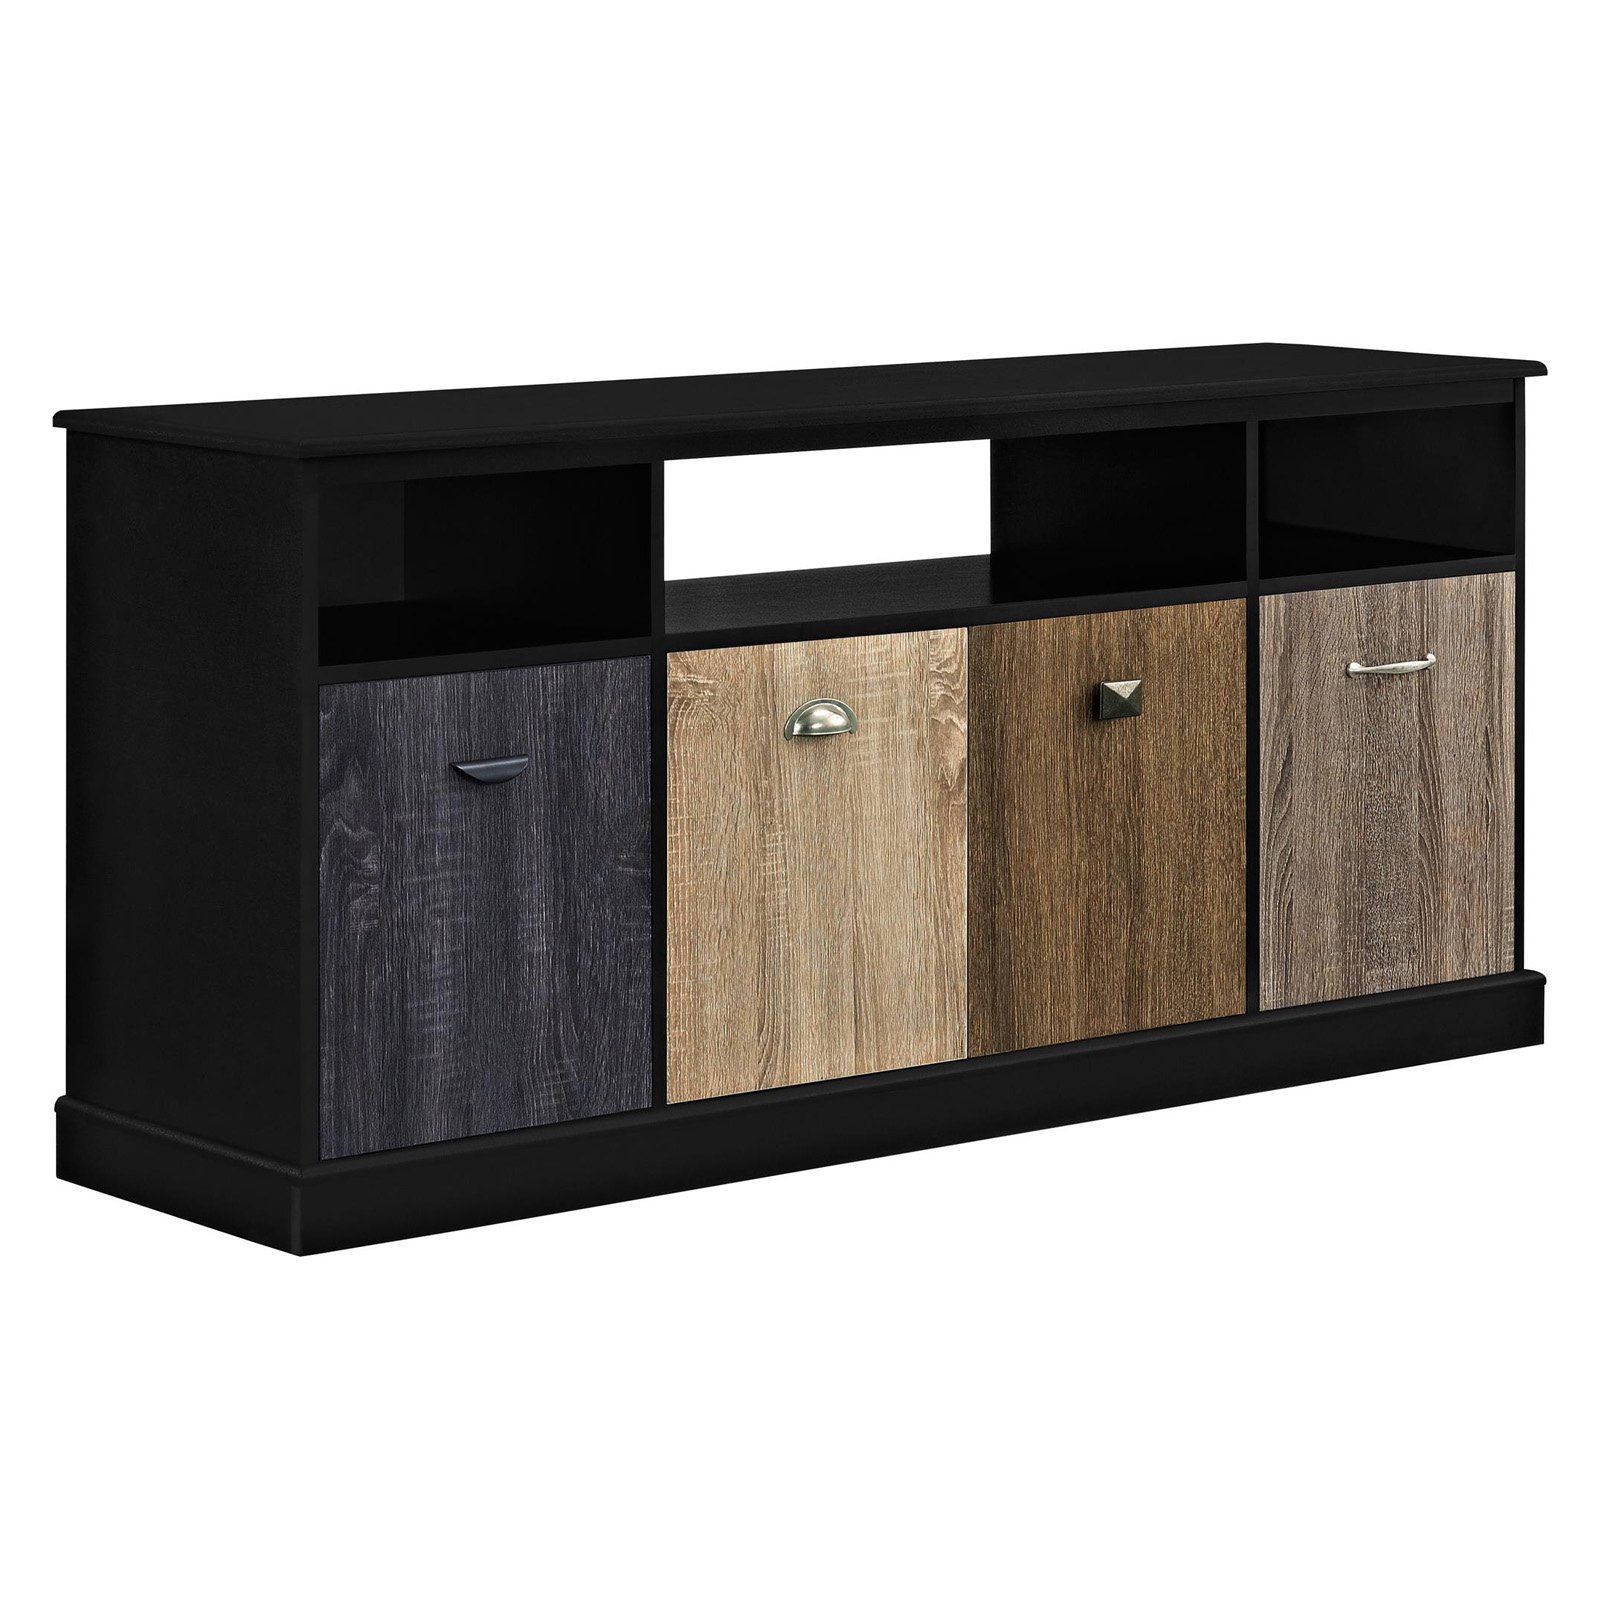 Ameriwood Home Mercer 60" TV Console with Multicolored Door Fronts, Multiple Colors - Black - image 3 of 5